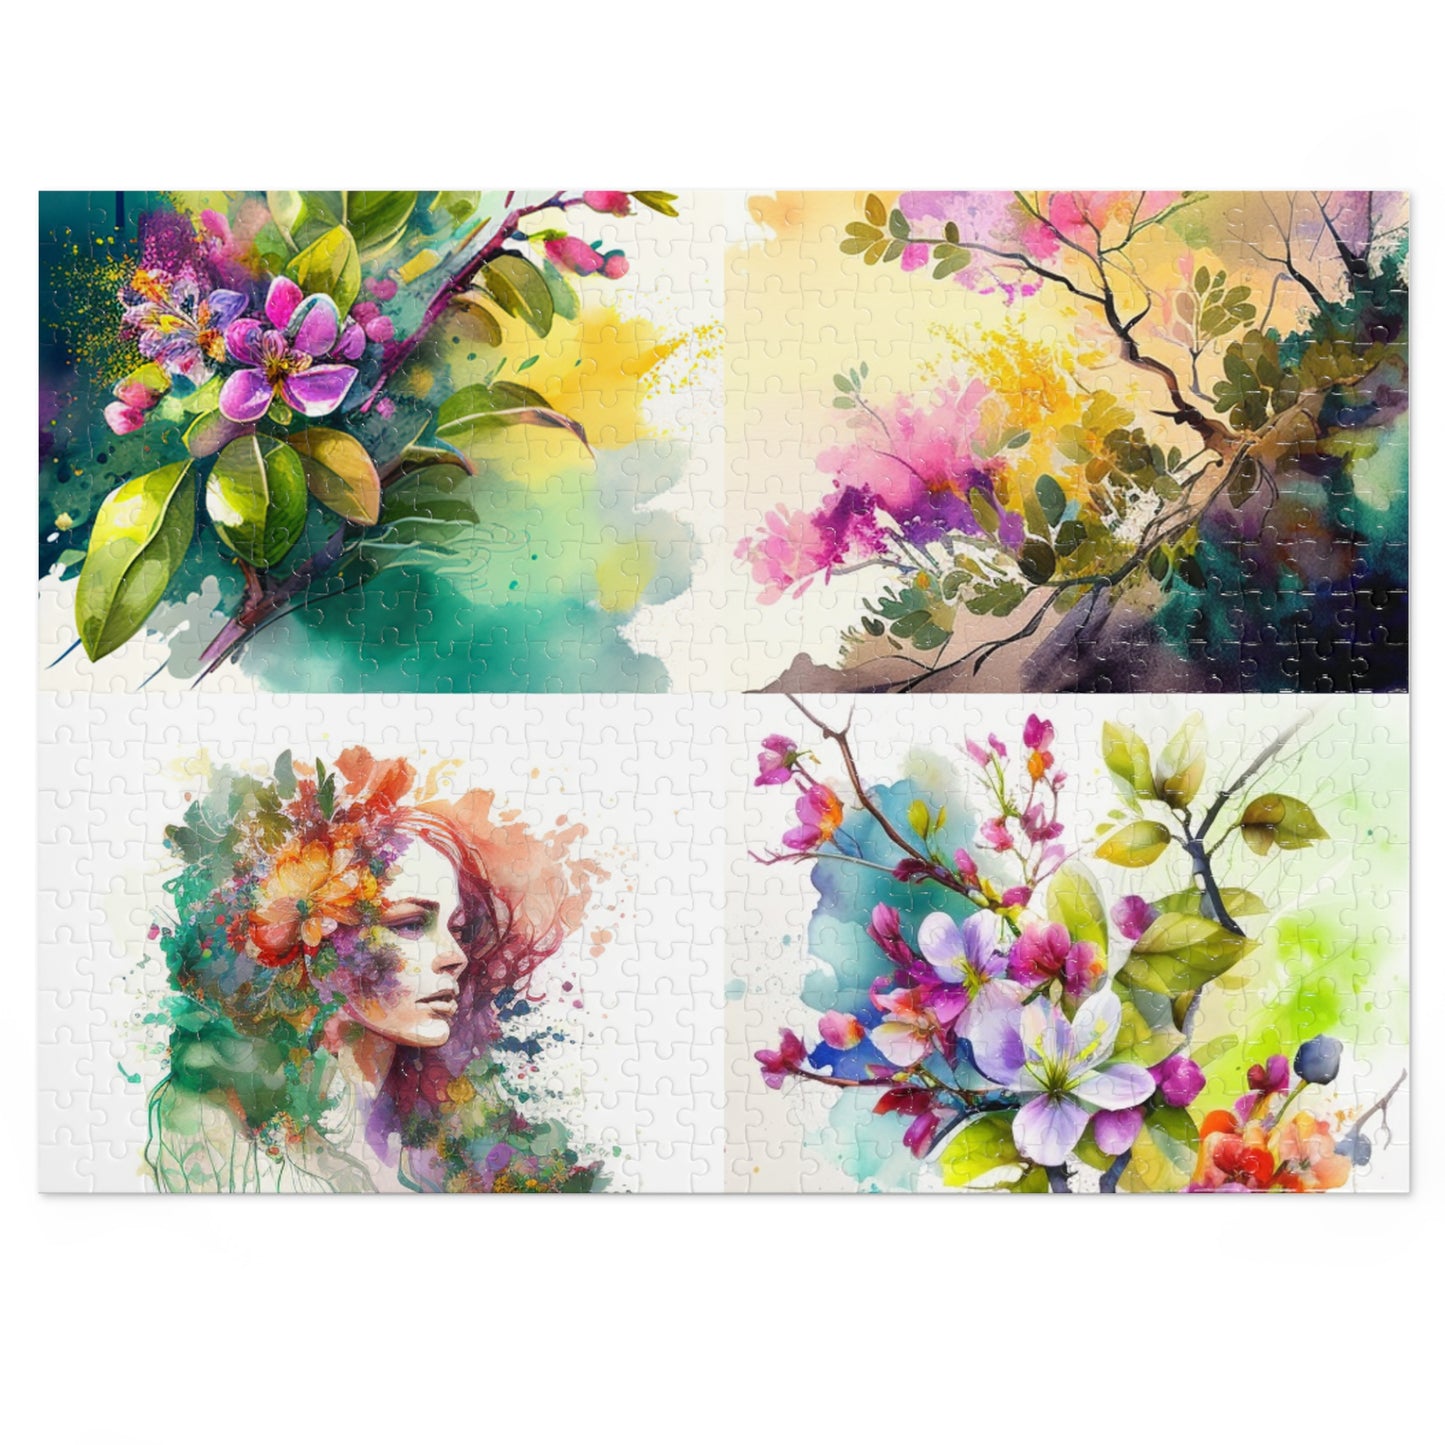 Jigsaw Puzzle (30, 110, 252, 500,1000-Piece) Mother Nature Bright Spring Colors Realistic Watercolor 5